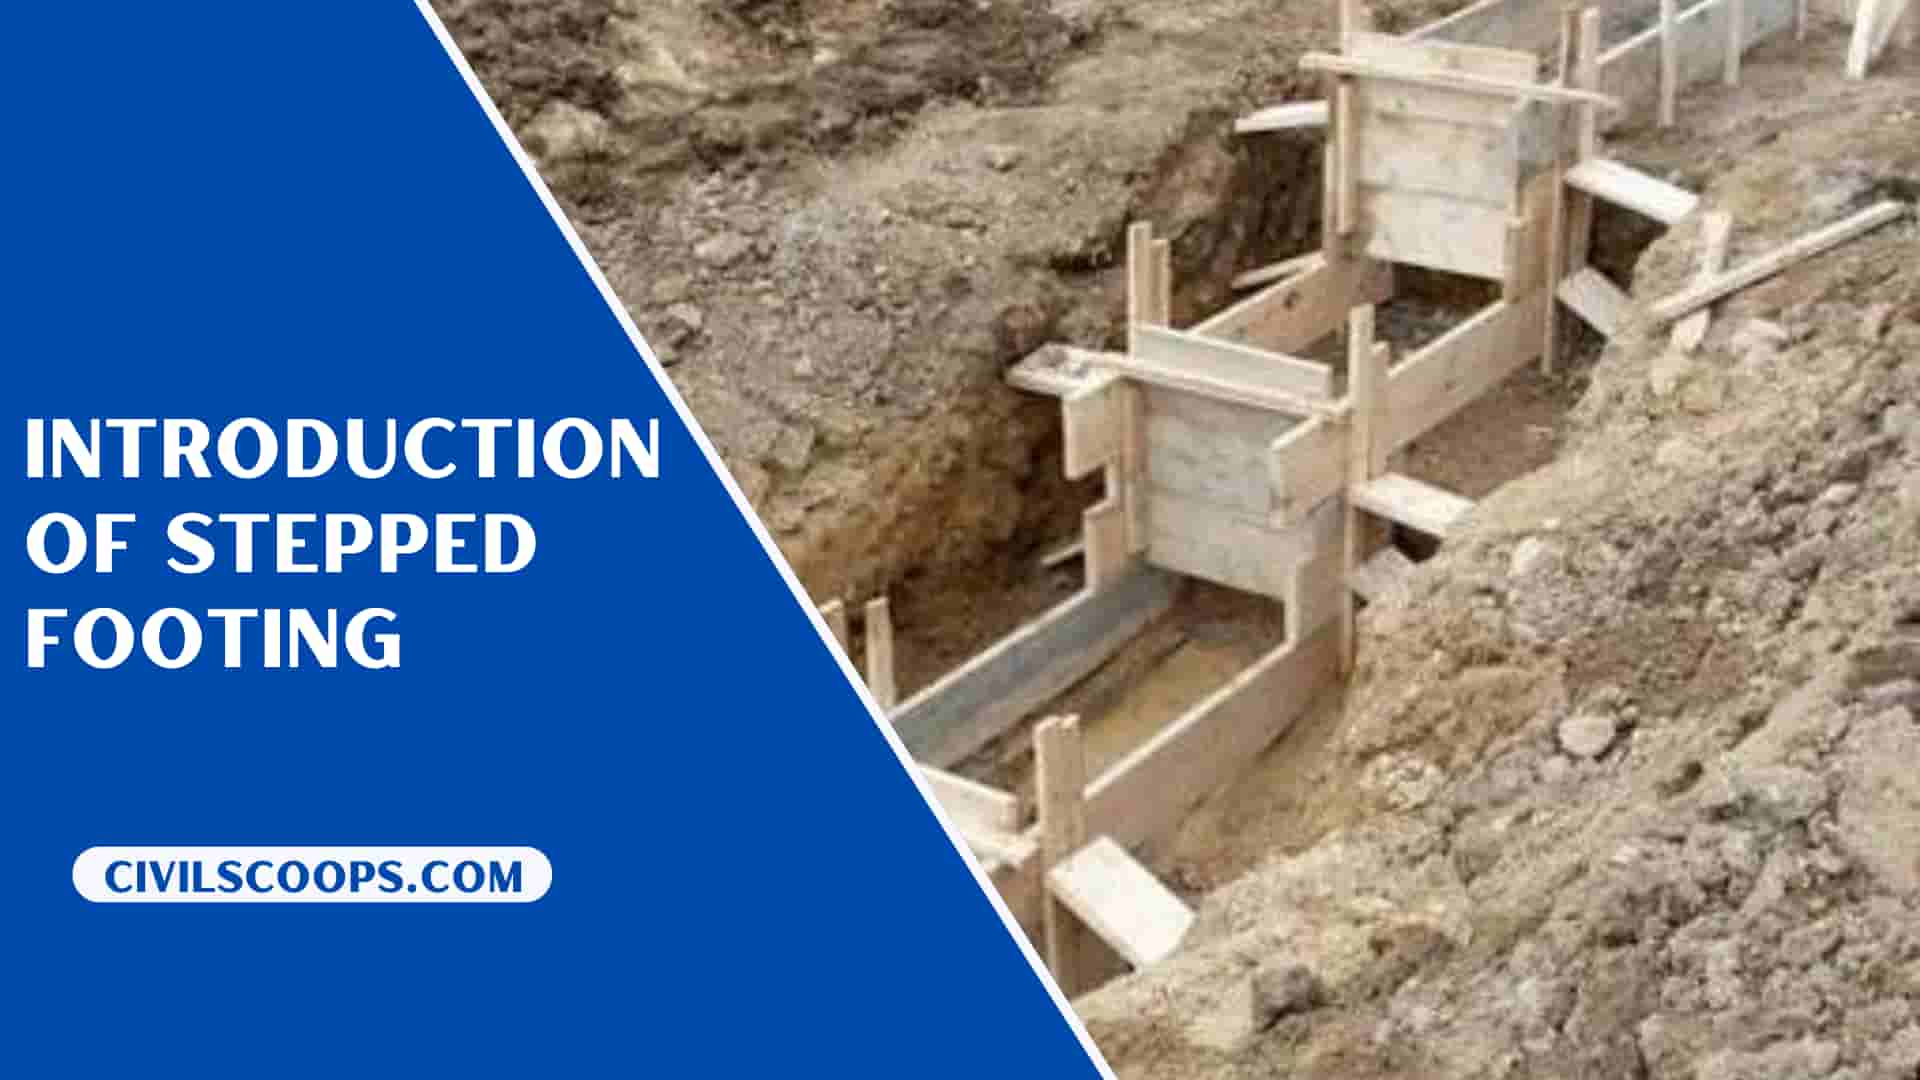 Introduction of Stepped Footing